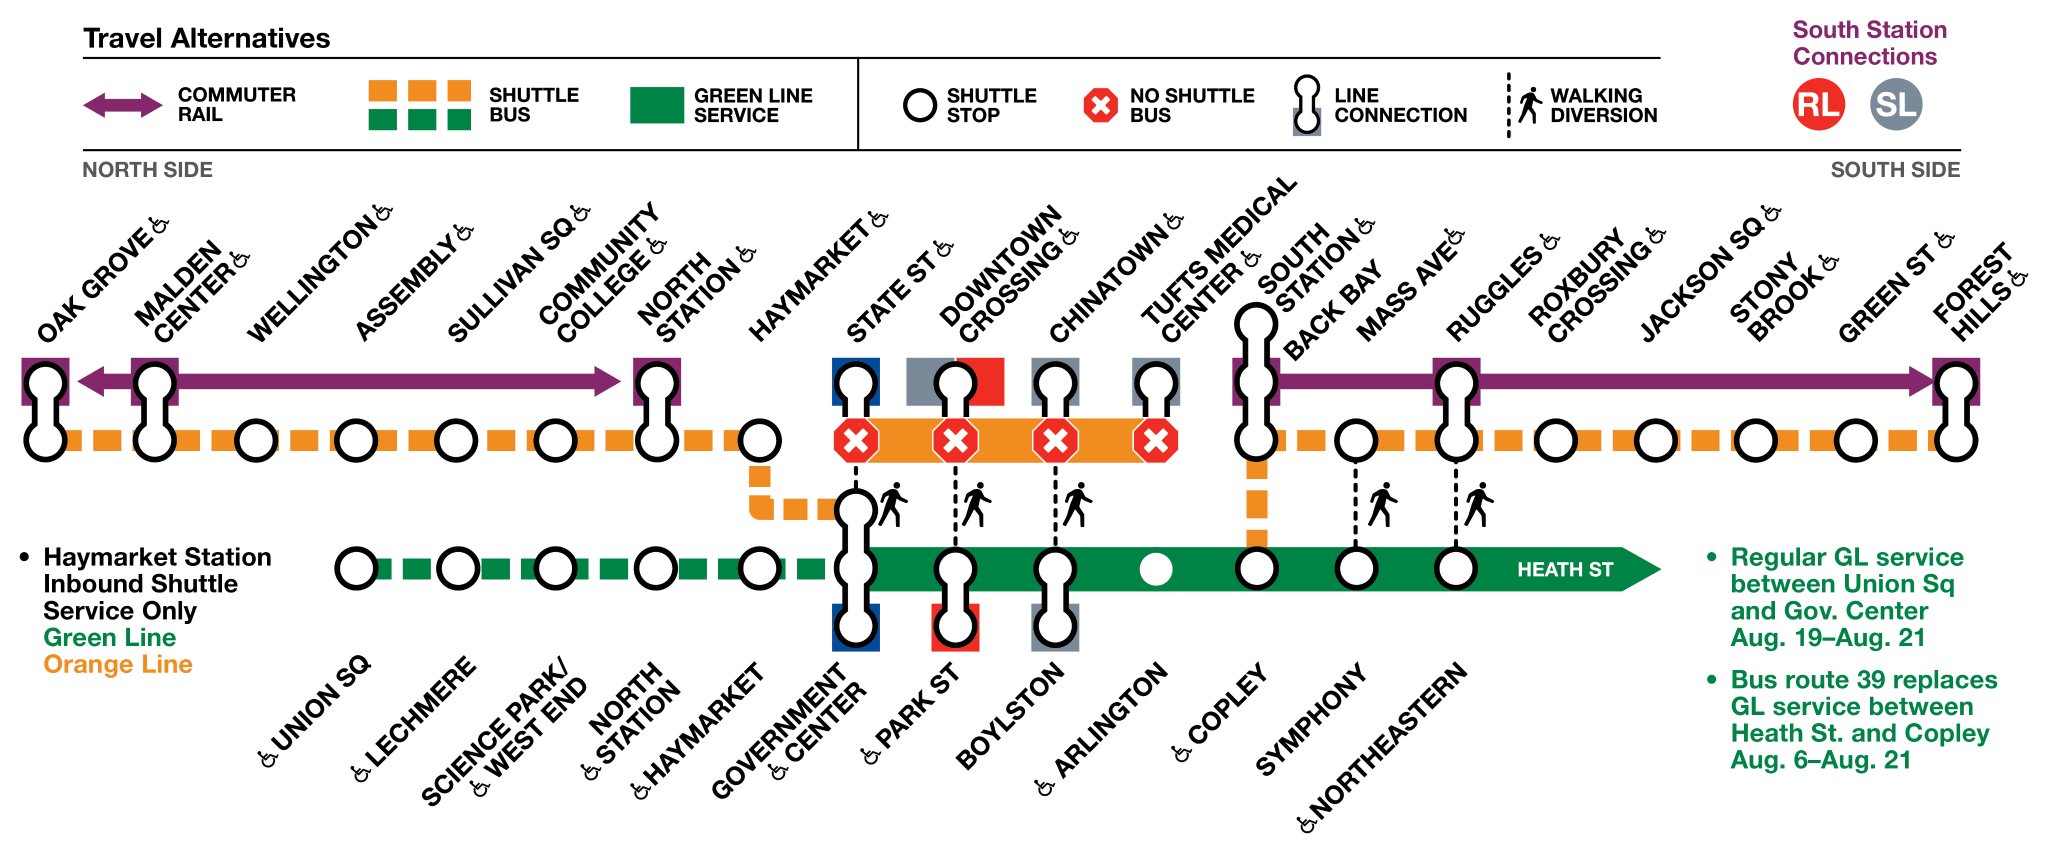 the MBTA's official detour map for the Orange Line shutdown, illustrating closed subway stops on the Orange and Green Lines, dashed lines indicating alternative shuttle service (between Forest Hills and Back Bay and Copley to the south, and between Oak Drove and Government Center to the north). To cross downtown Boston, riders will need to transfer from shuttles to the Green Line at Government Center or Copley, ride the Green Line a few stops, then transfer back to another shuttle on the other side.